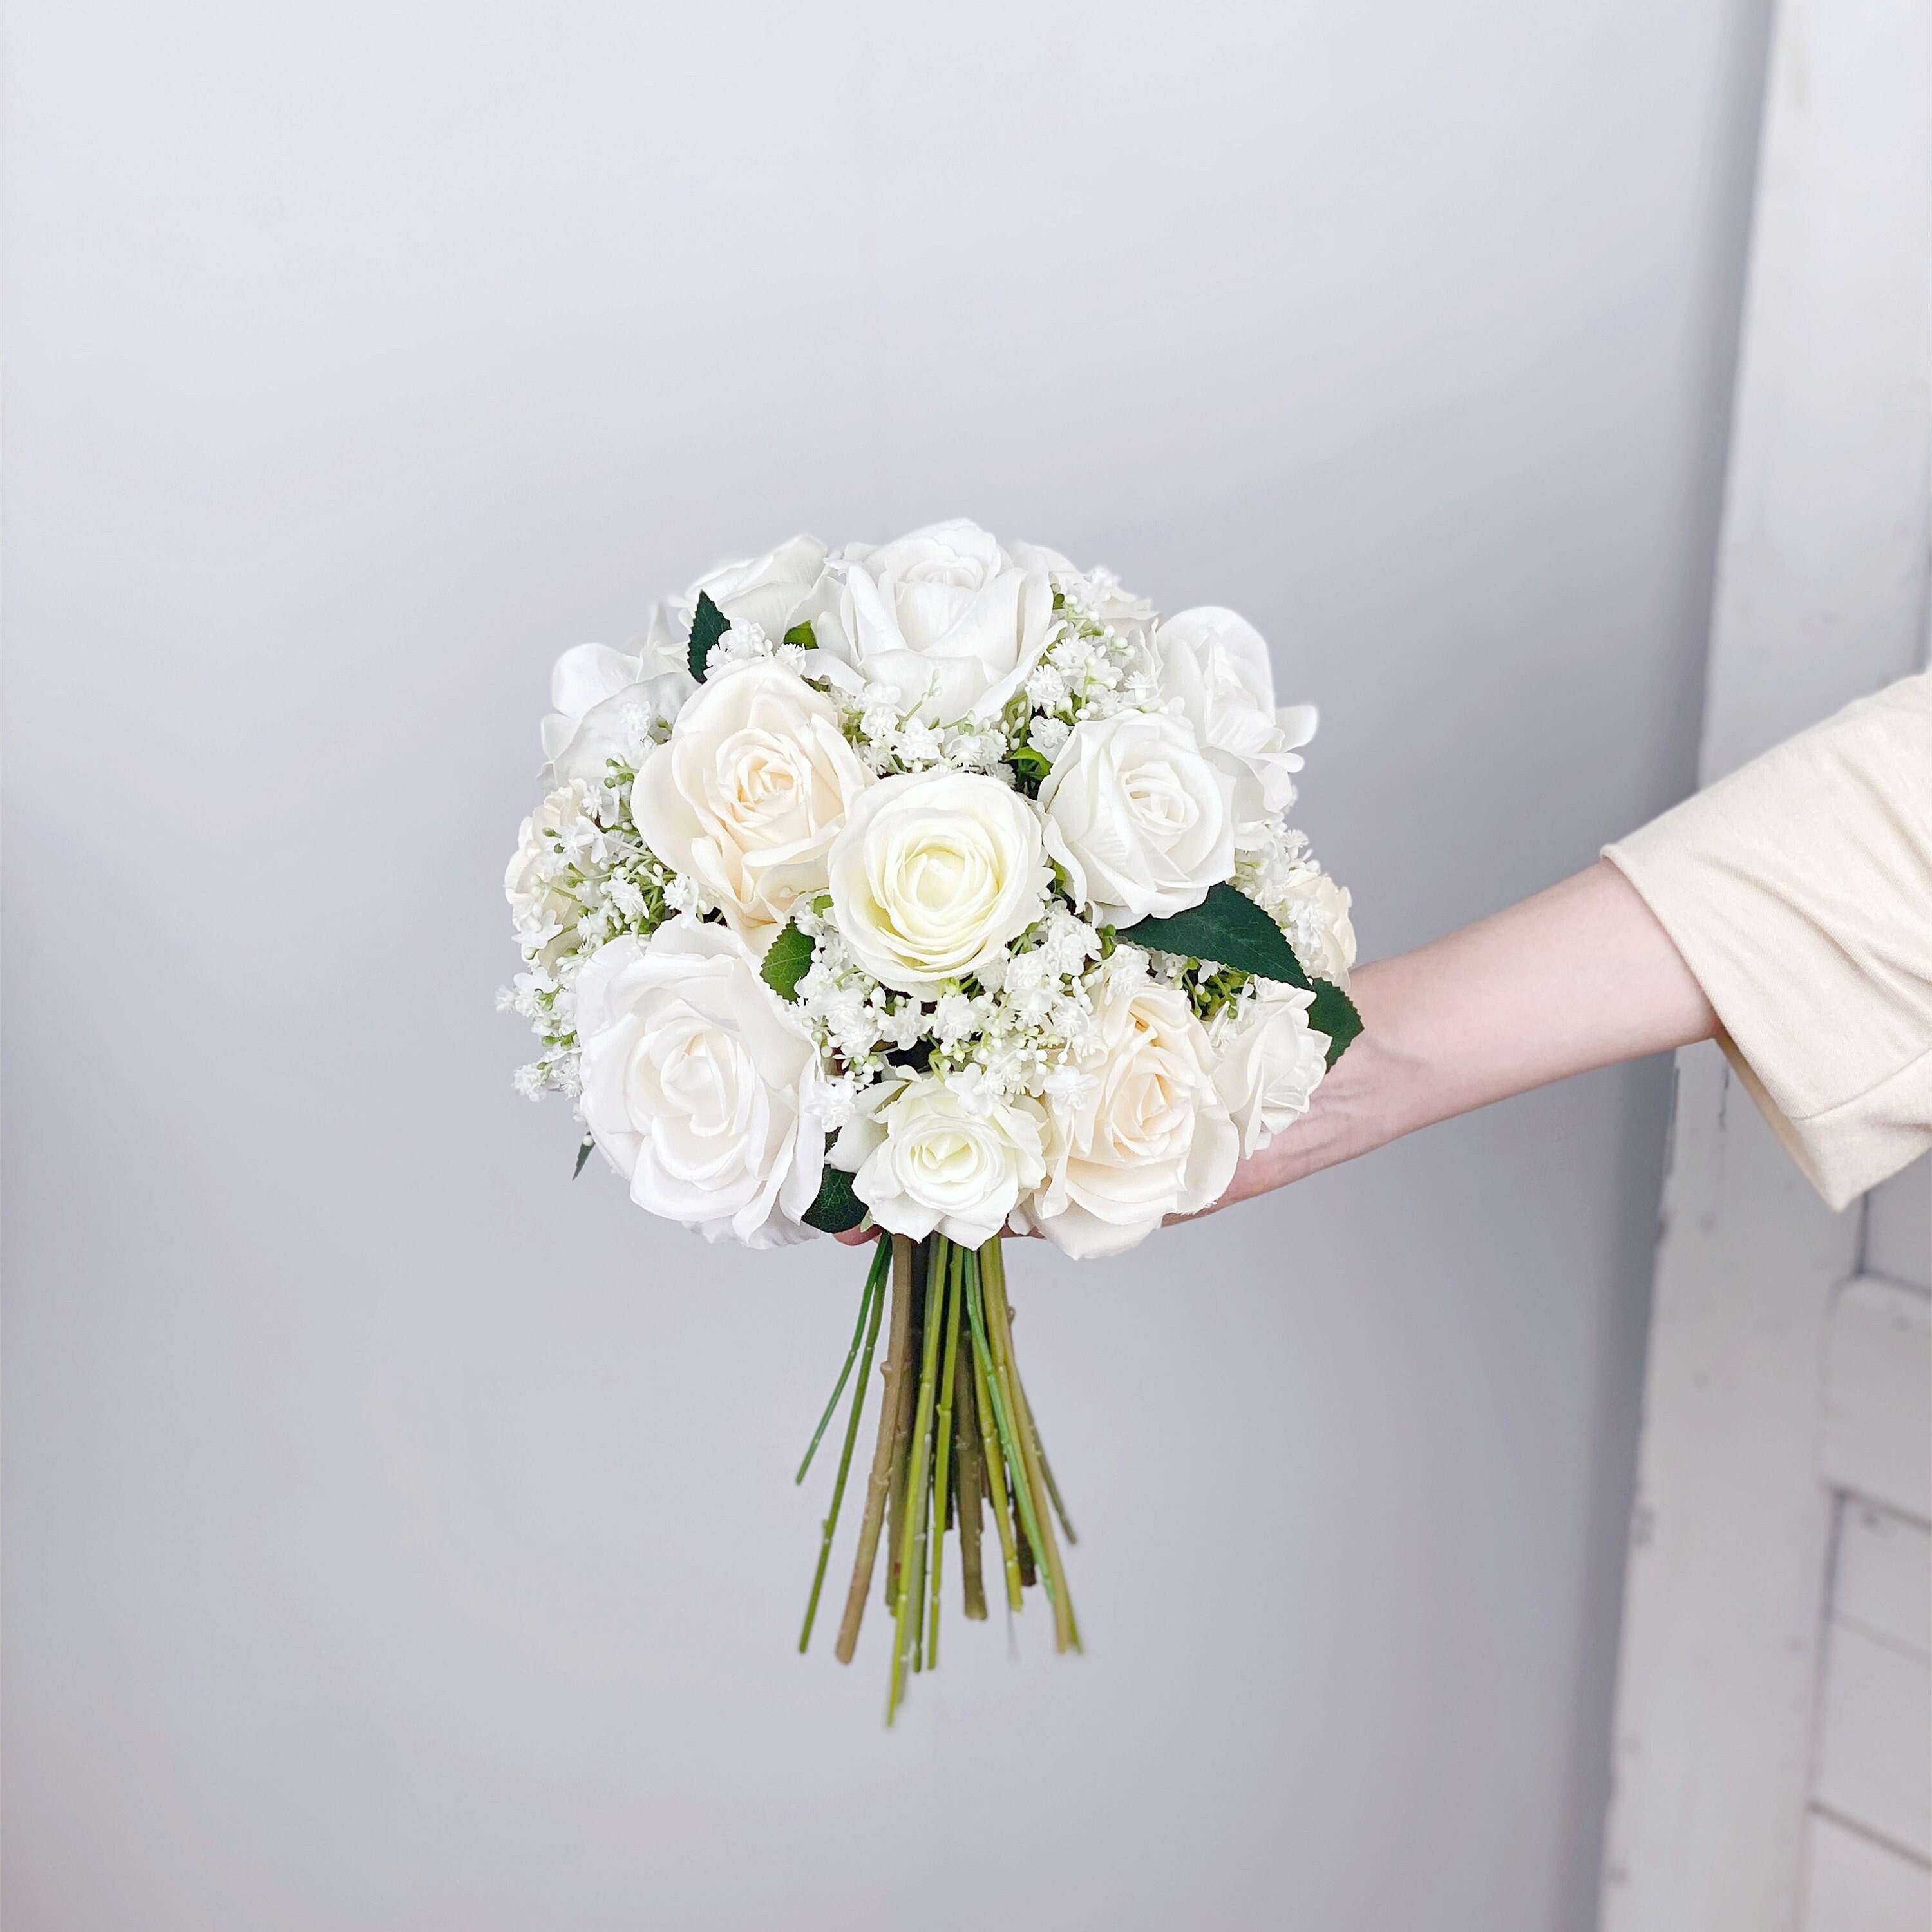 White Rose Boutonniere with babies breath & greens - Plainfield Florist